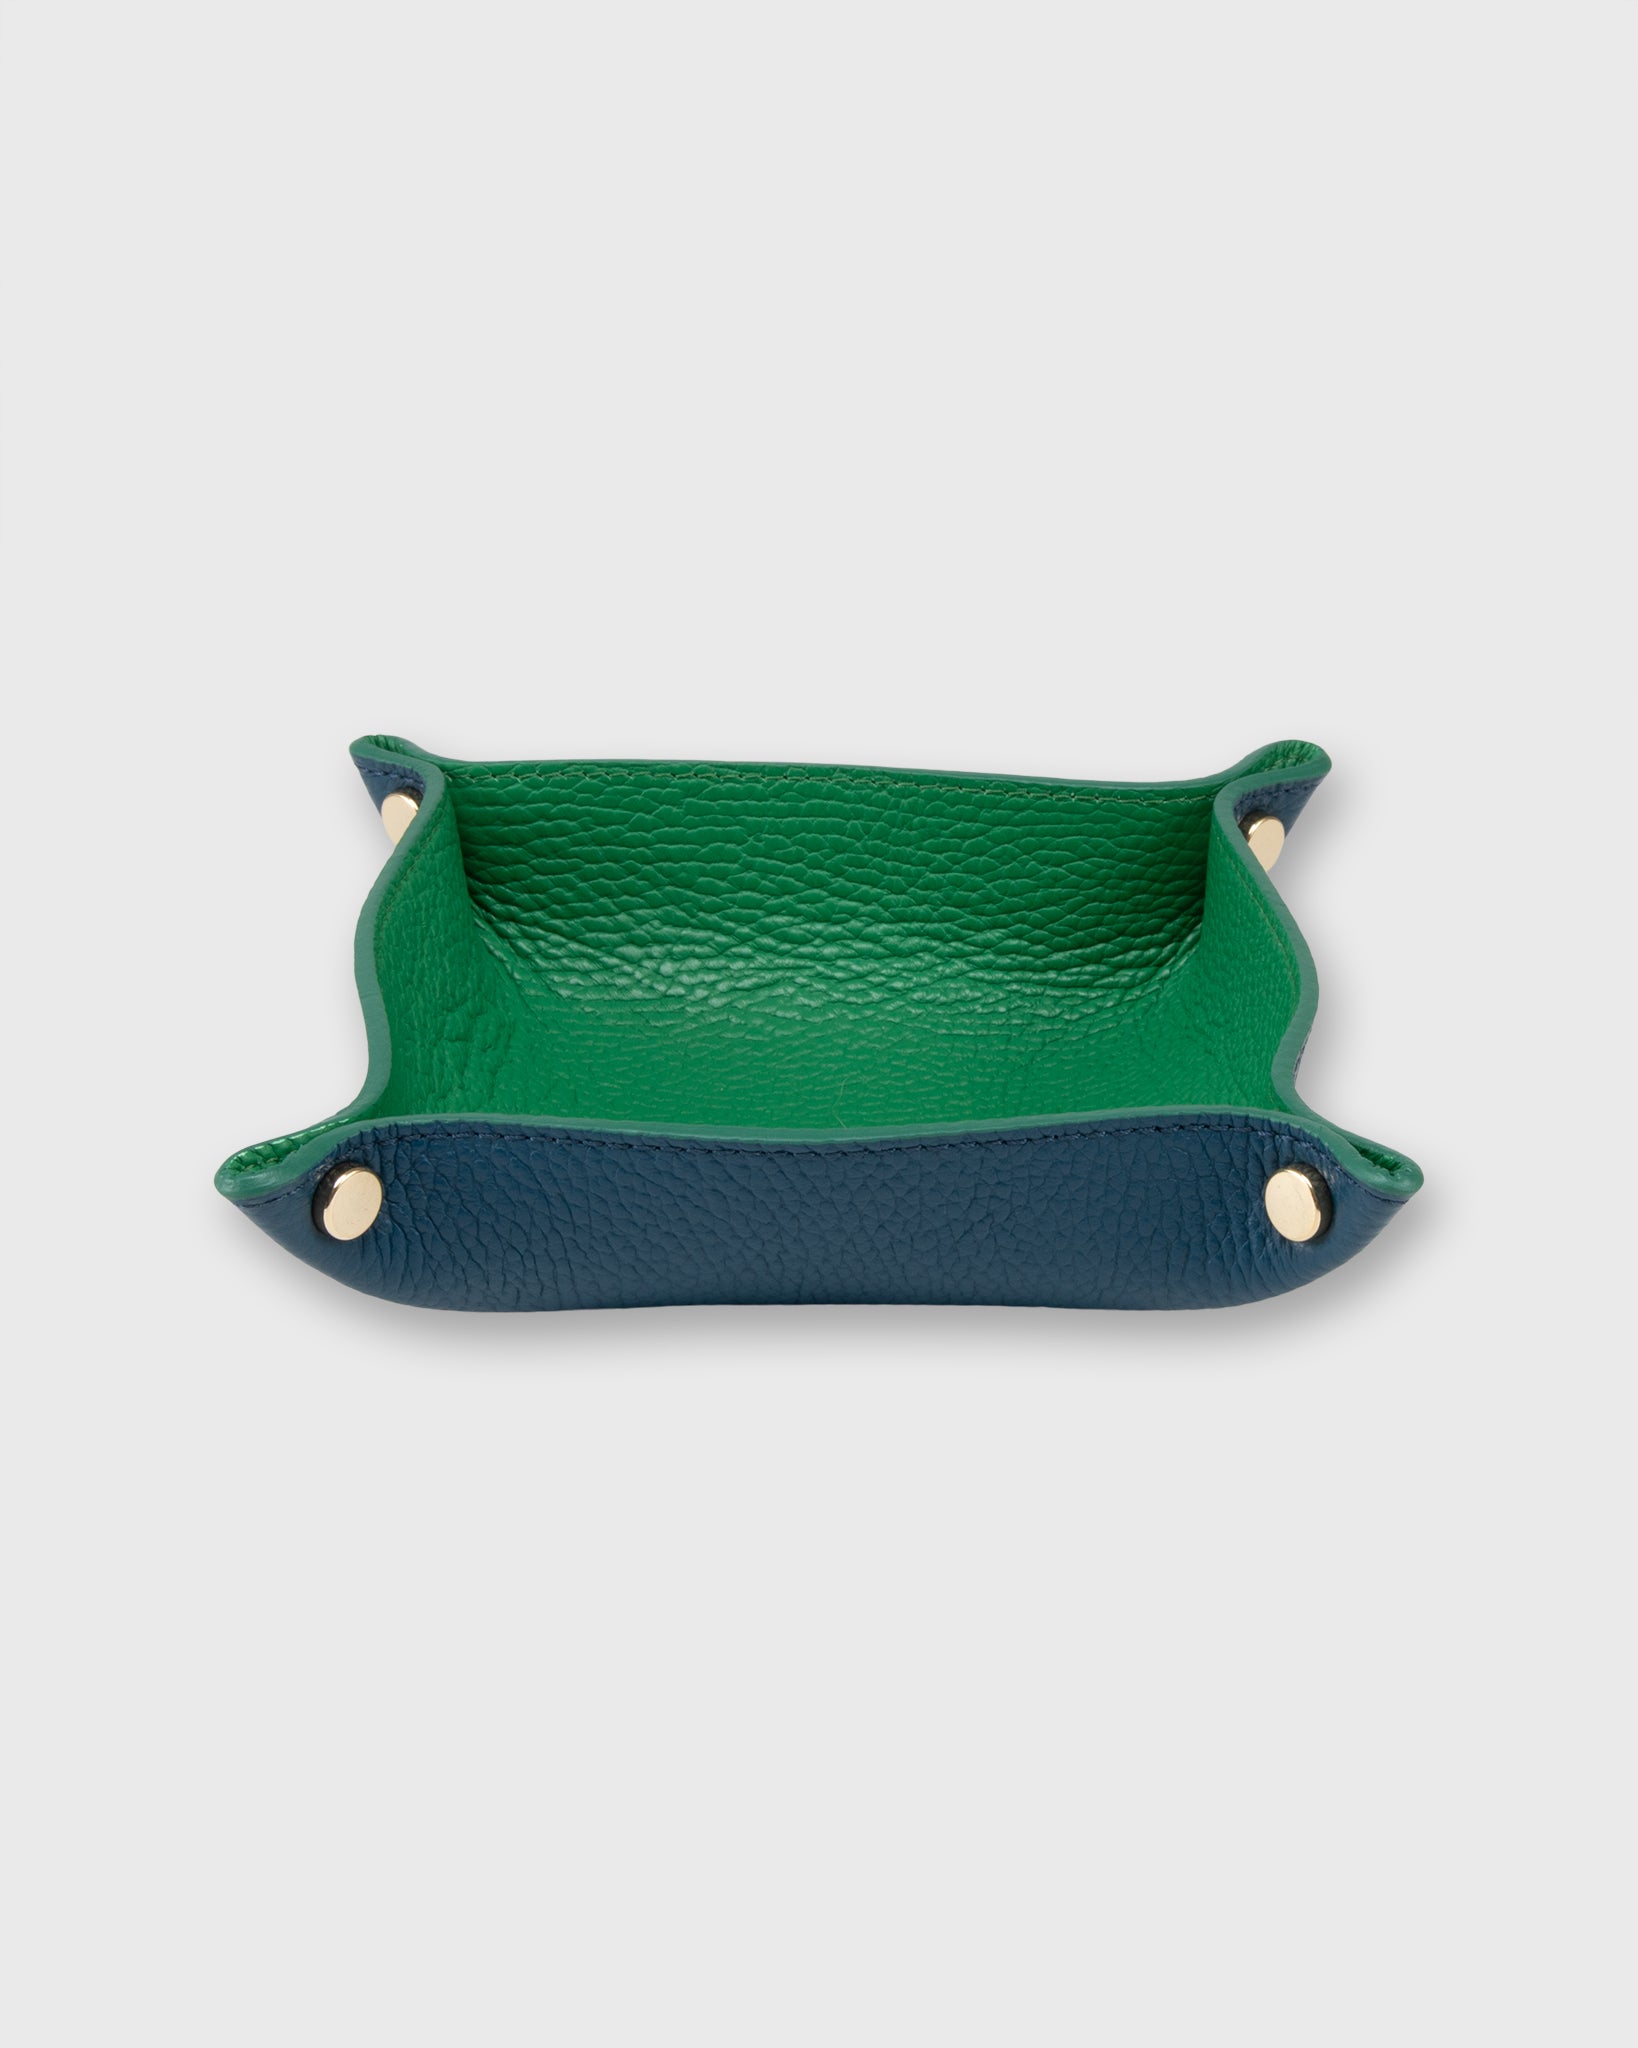 Two-Tone Soft Medium Square Tray in Kelly/Dark Blue Leather